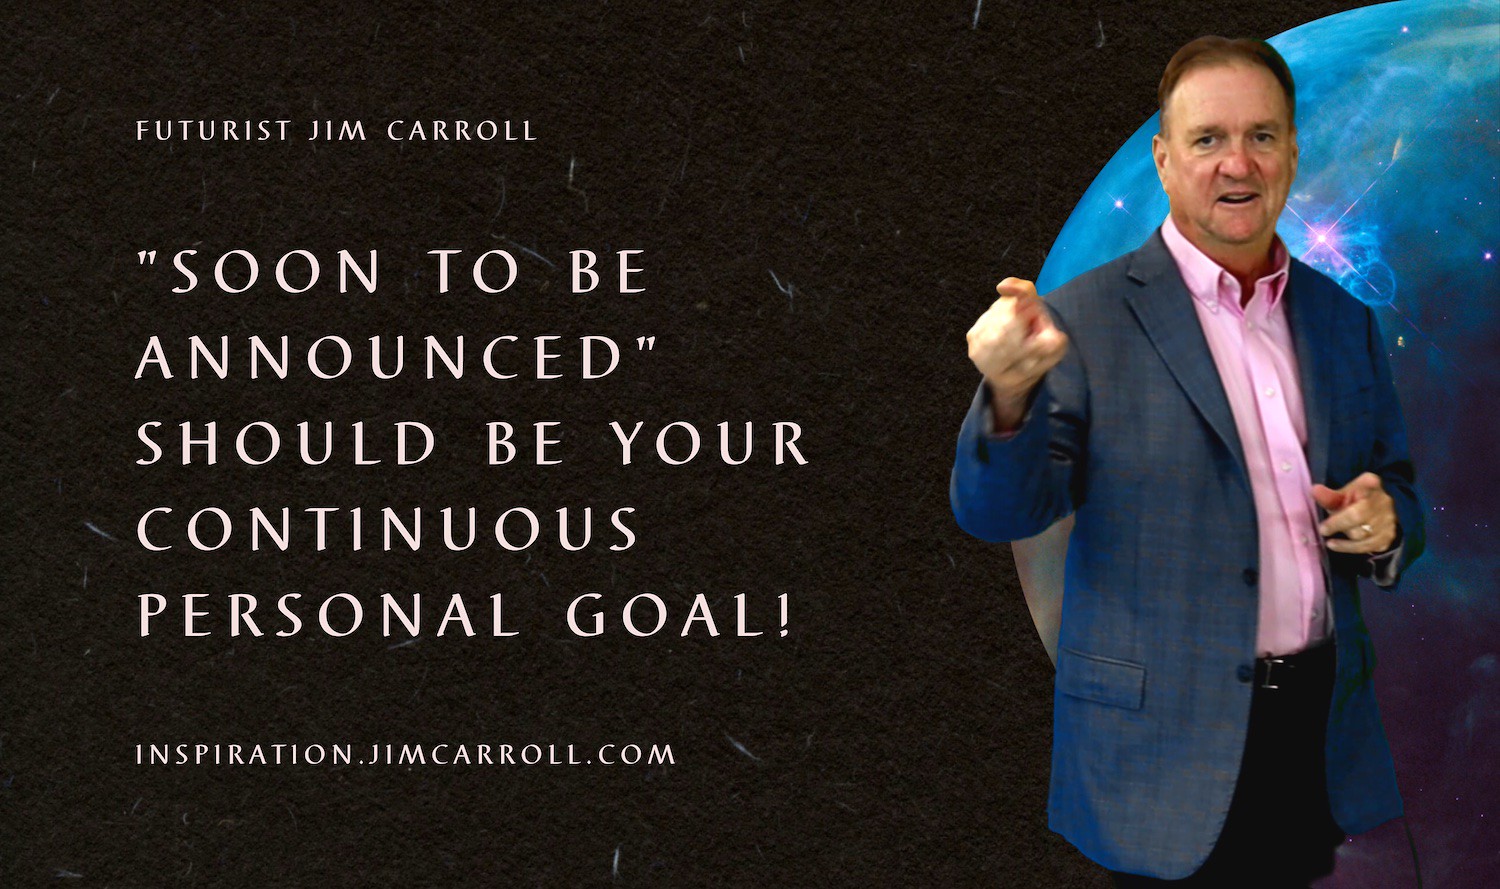 "'Soon to be announced' should be your continuous personal goal!" - Futurist Jim Carroll